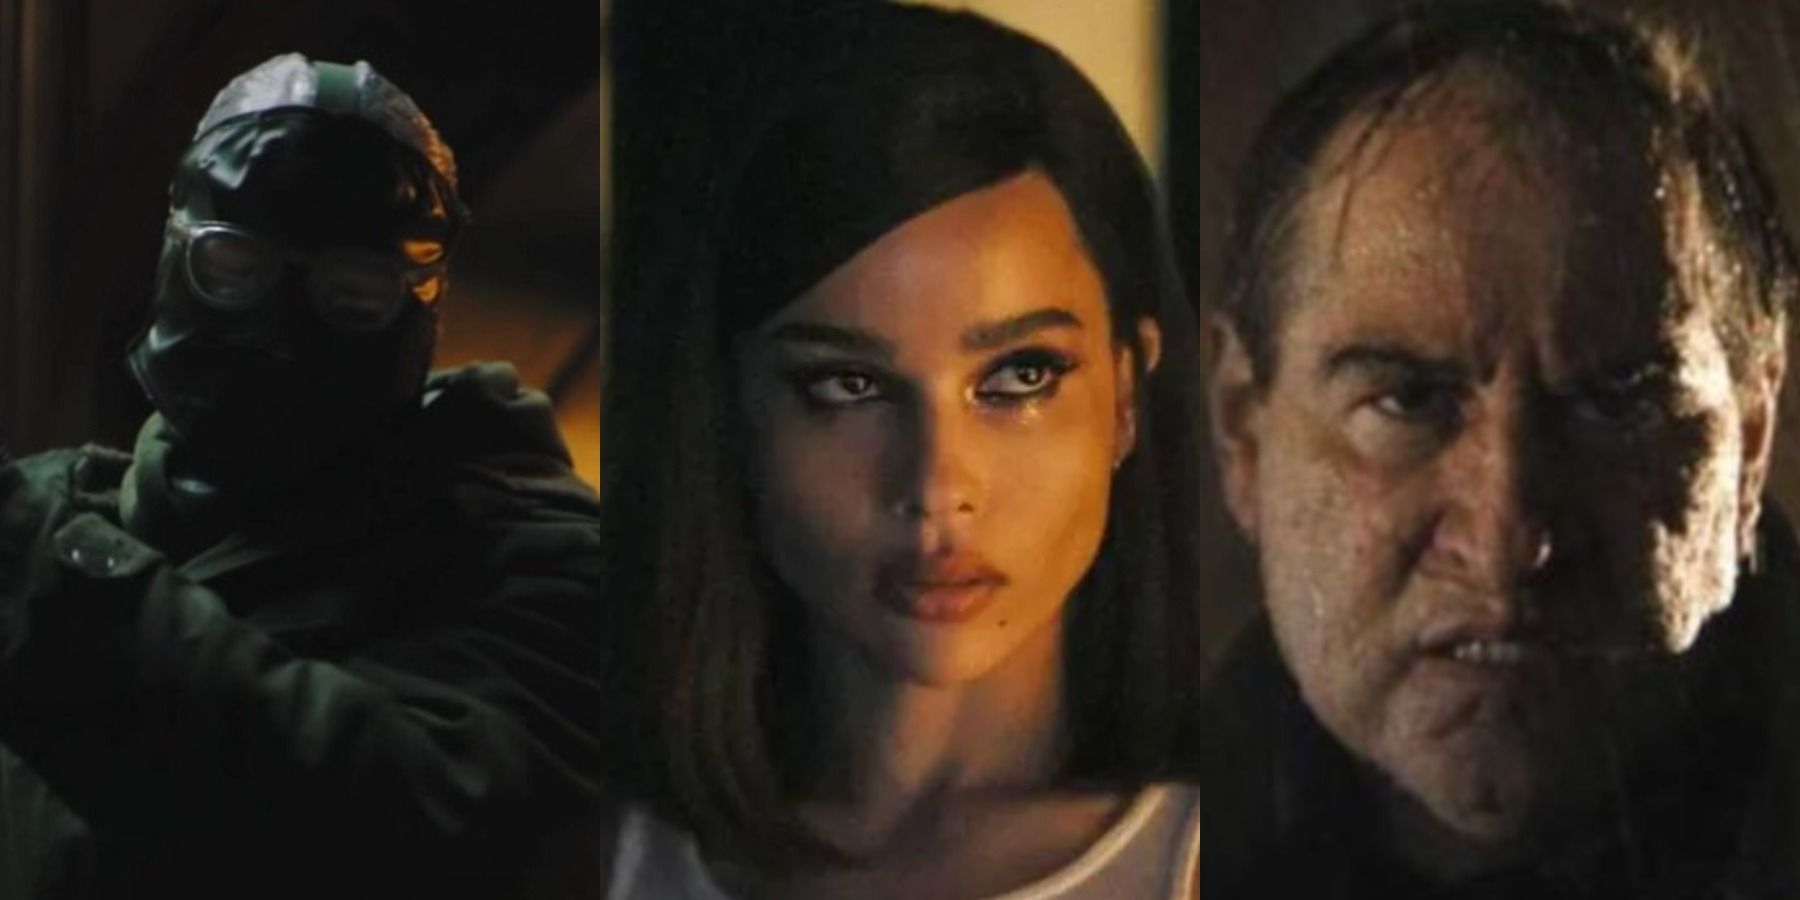 A split image depicts Riddler, Catwoman, and Penguin in the 2022 trailer for The Batman